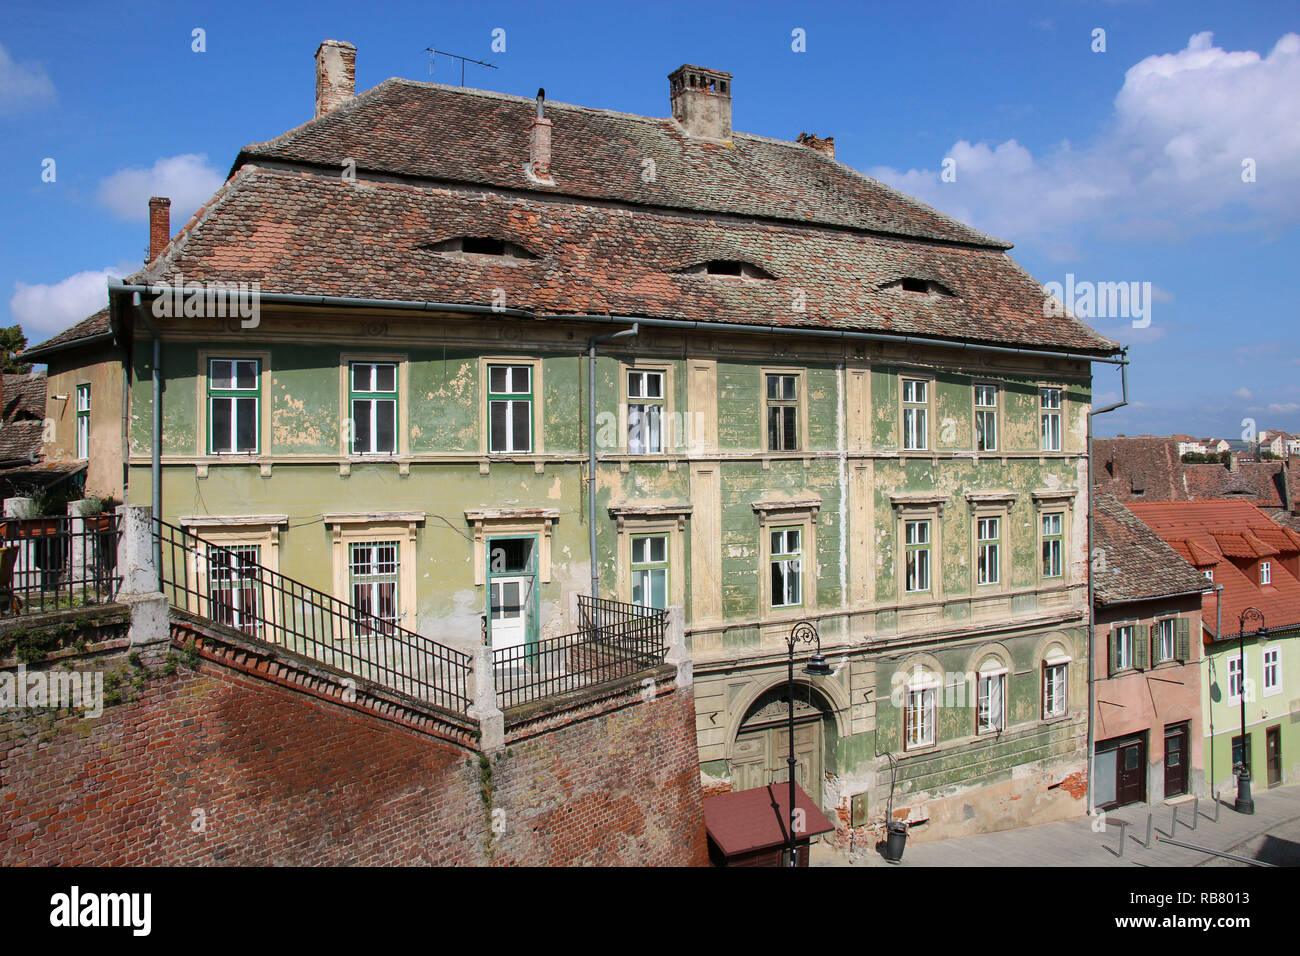 Historical old buildings in the medieval city Sibiu- Hermannstadt, Romania.  Eyes in the roof - architectural detail 'The Romania Eyes' Stock Photo -  Alamy